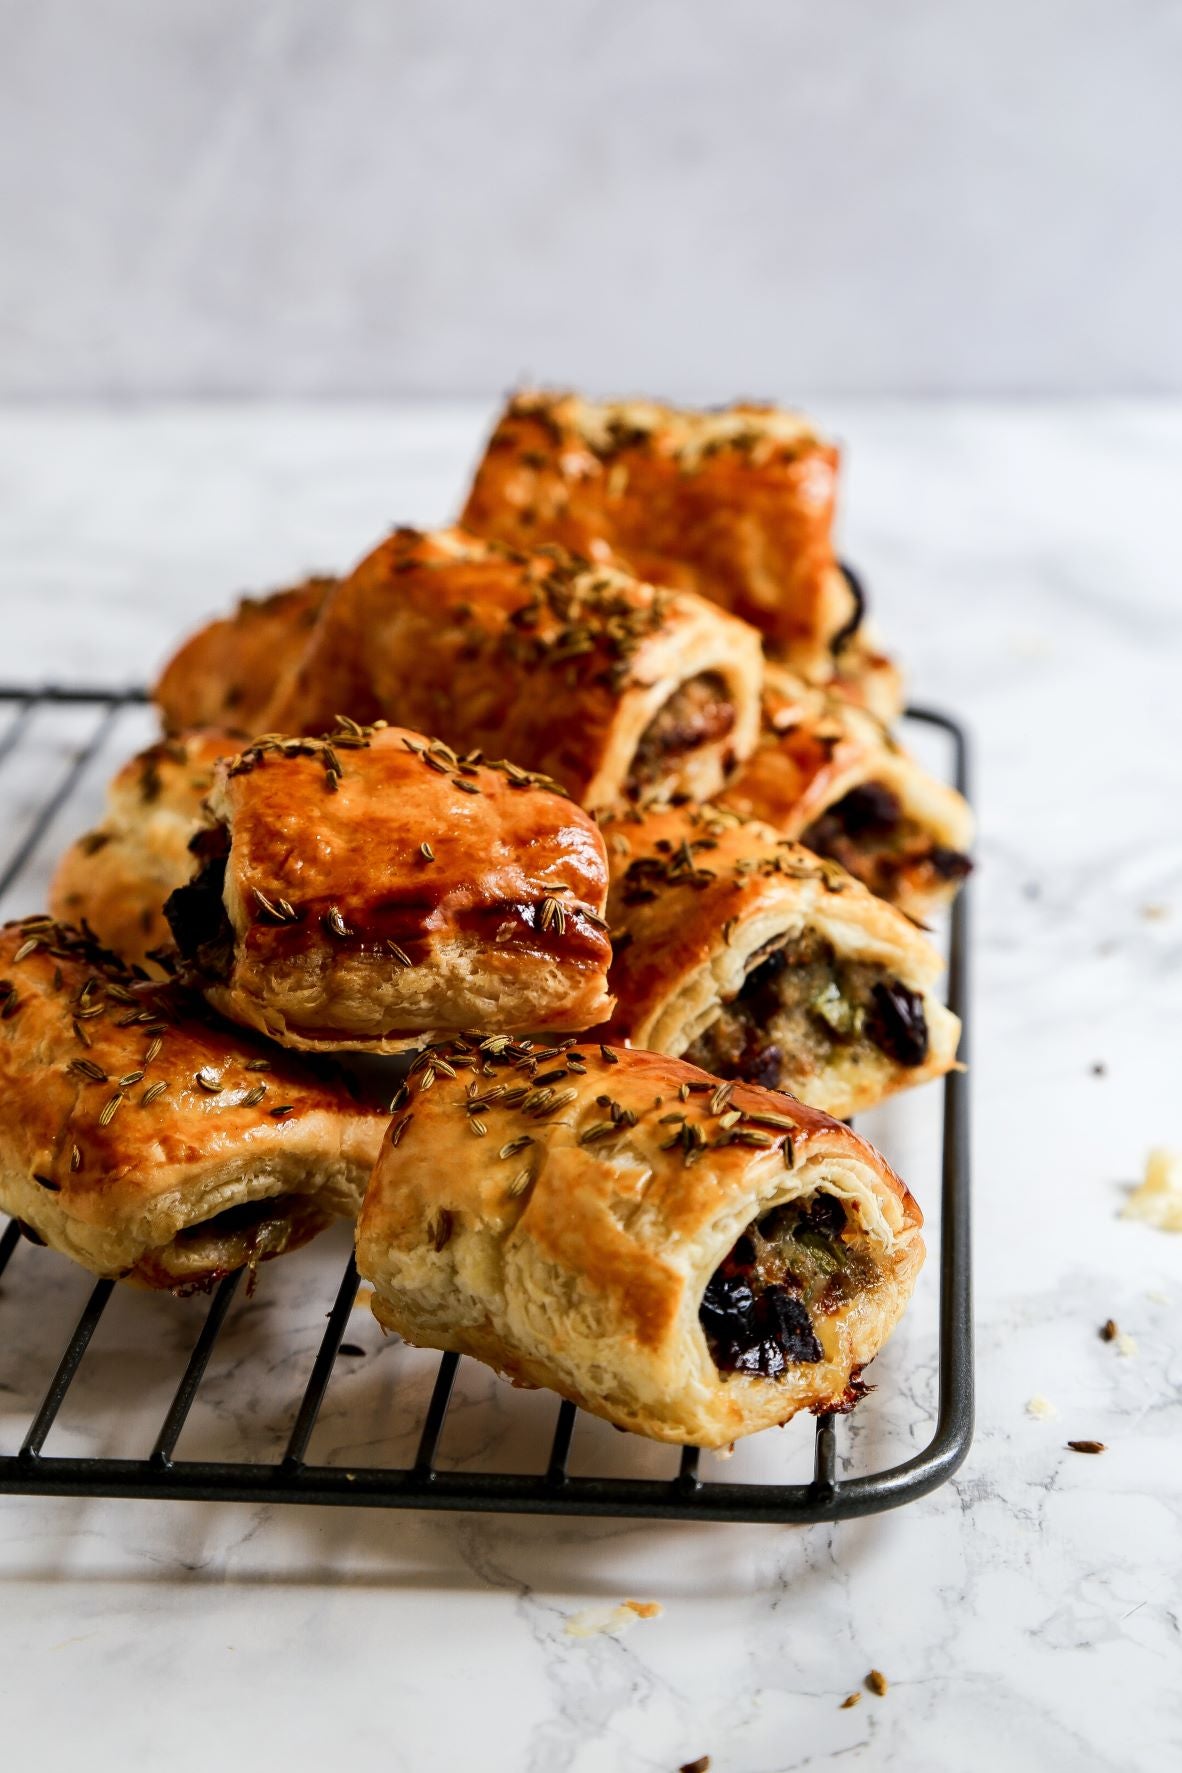 RECIPE OF THE WEEK: The Ultimate Easy Sausage Roll Recipe